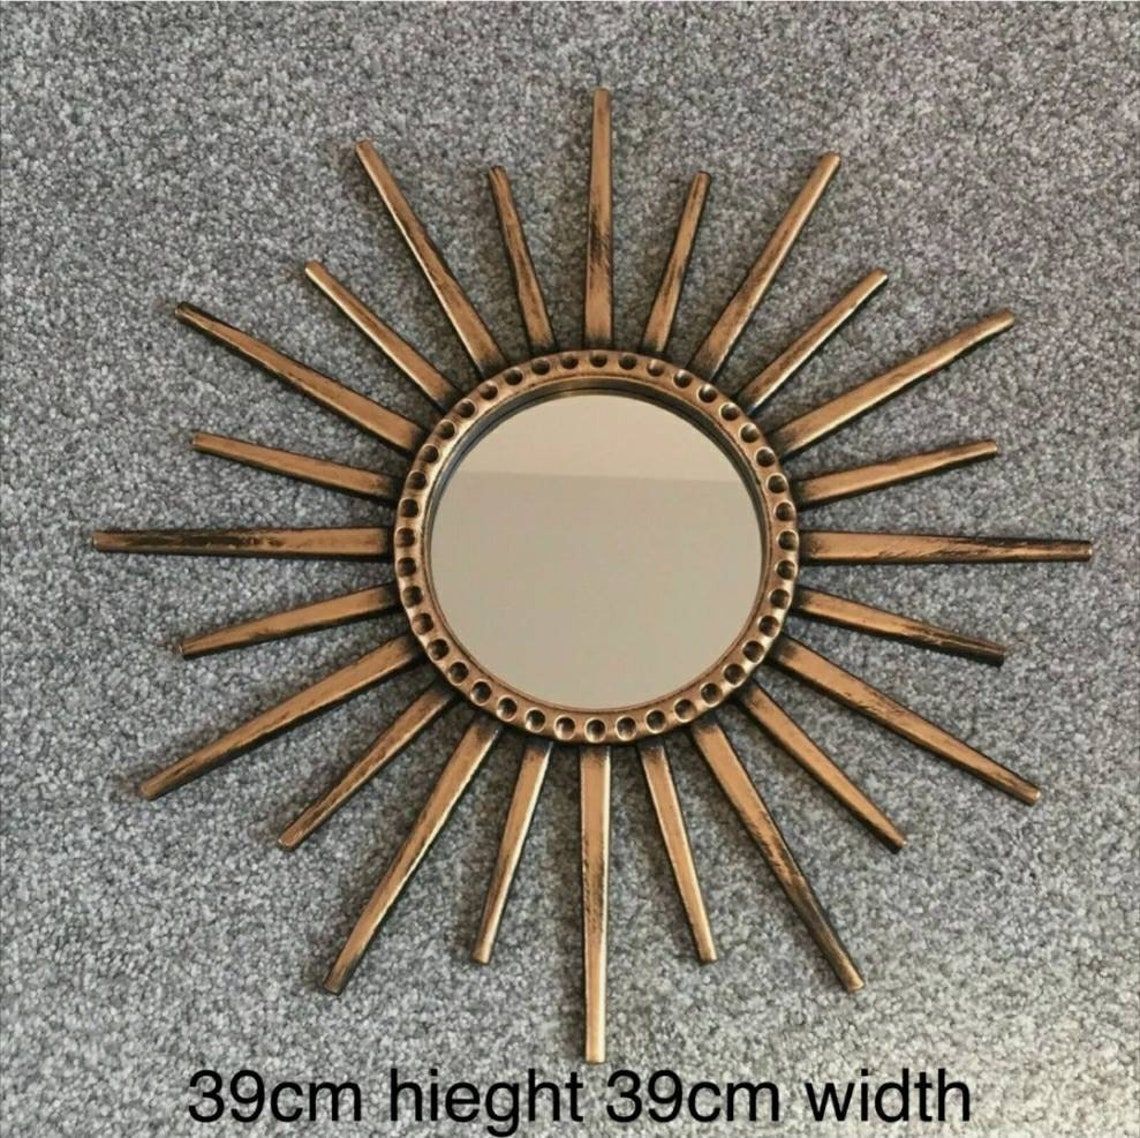 Sun Star And Eye Shaped Wall Mirrors Set Of 5 Brushed Gold | Etsy Inside Sun Shaped Wall Mirrors (View 9 of 15)